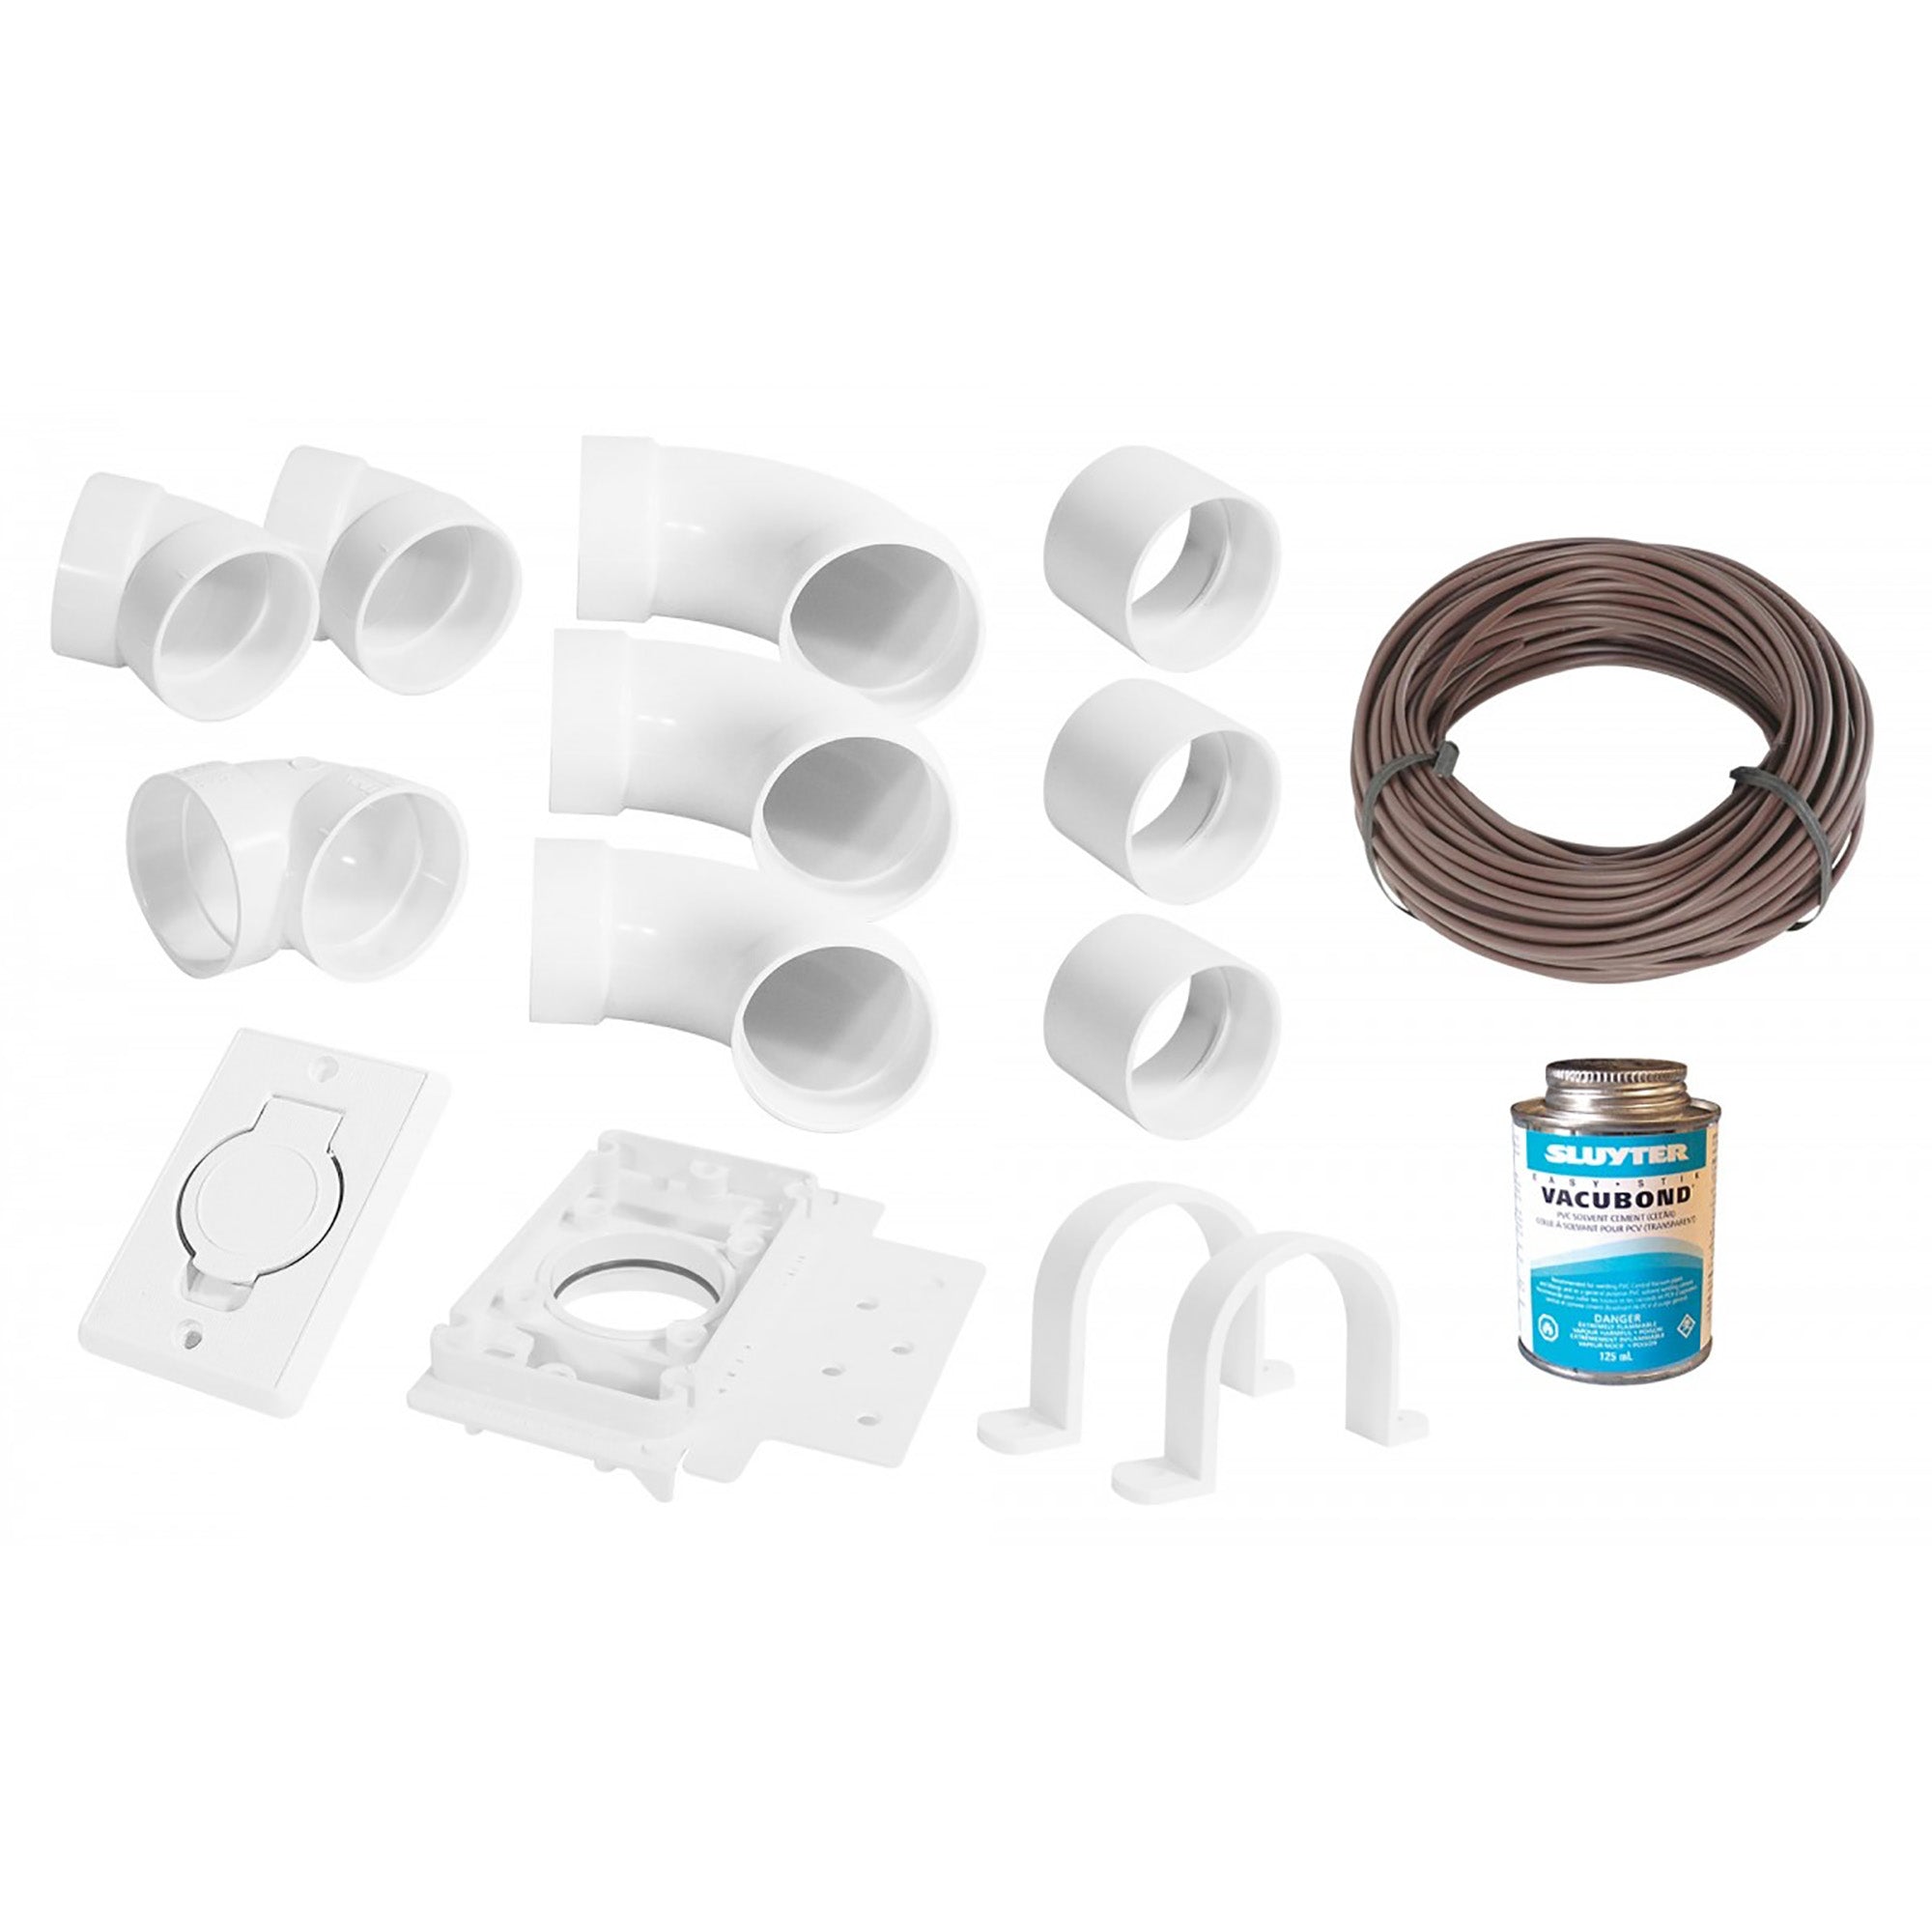 Central Vacuum Installation Kit - 1 Outlet and Accessories